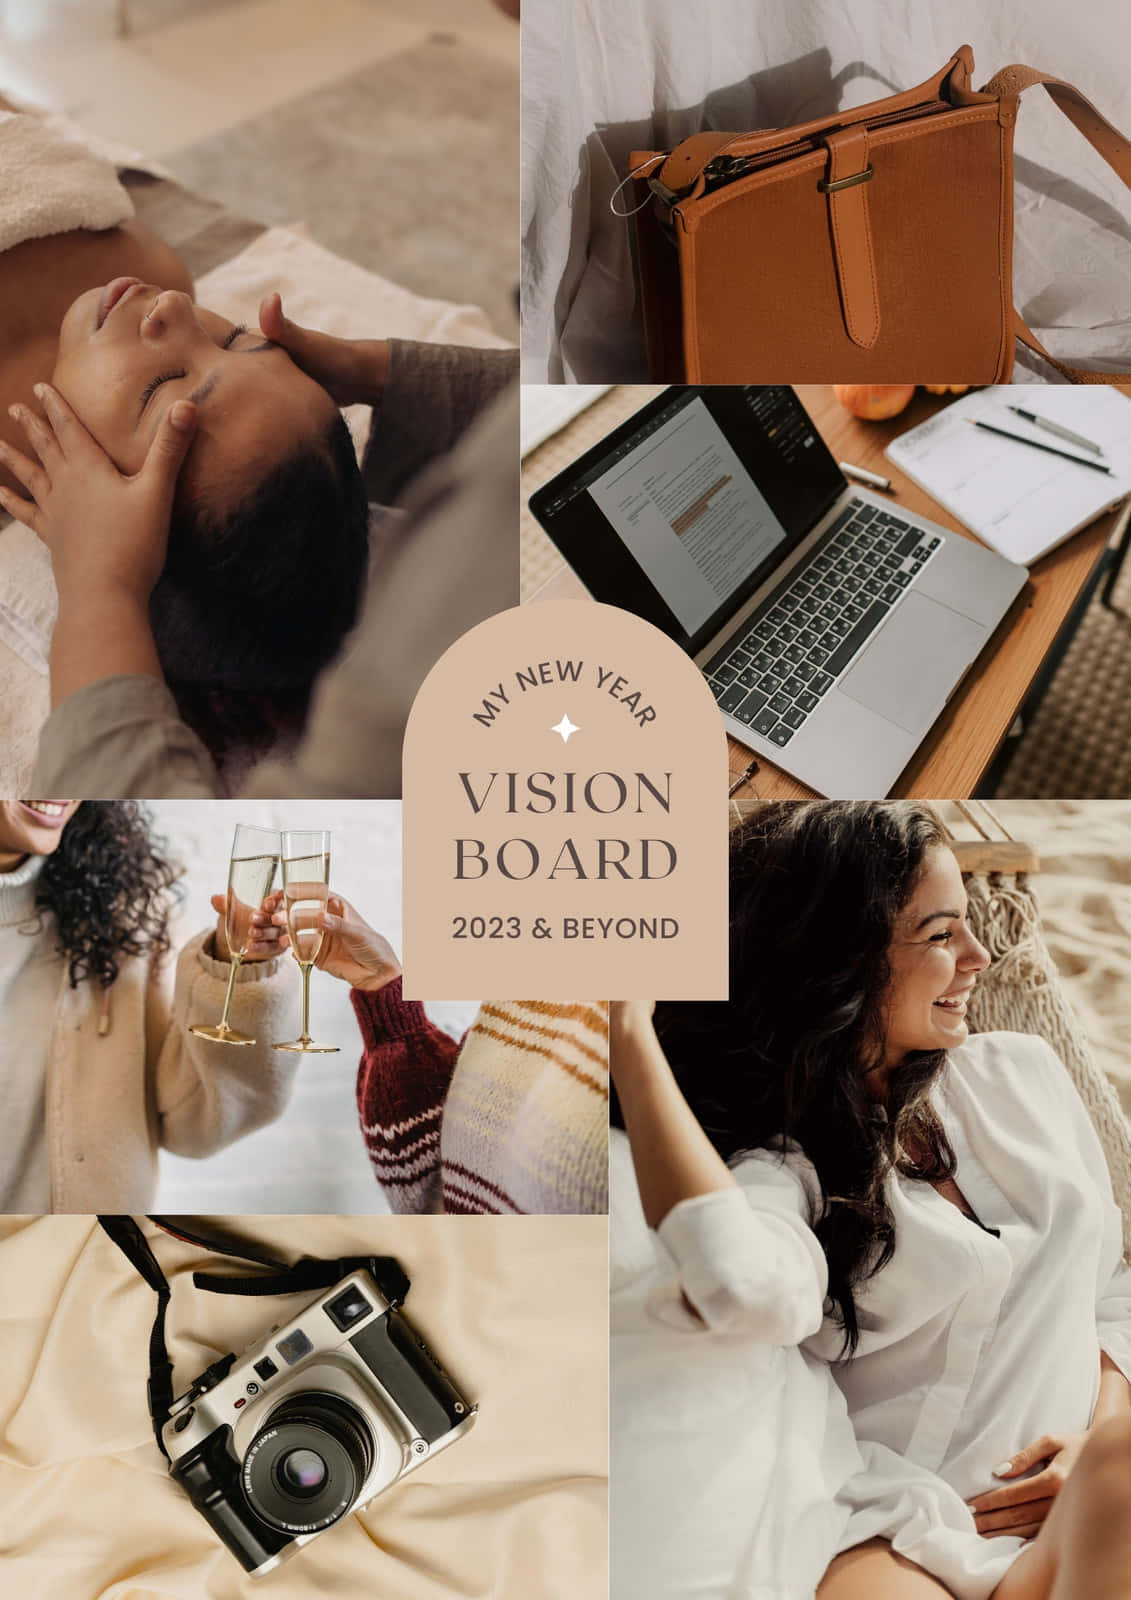 A Collage Of Women With A Camera And A Laptop